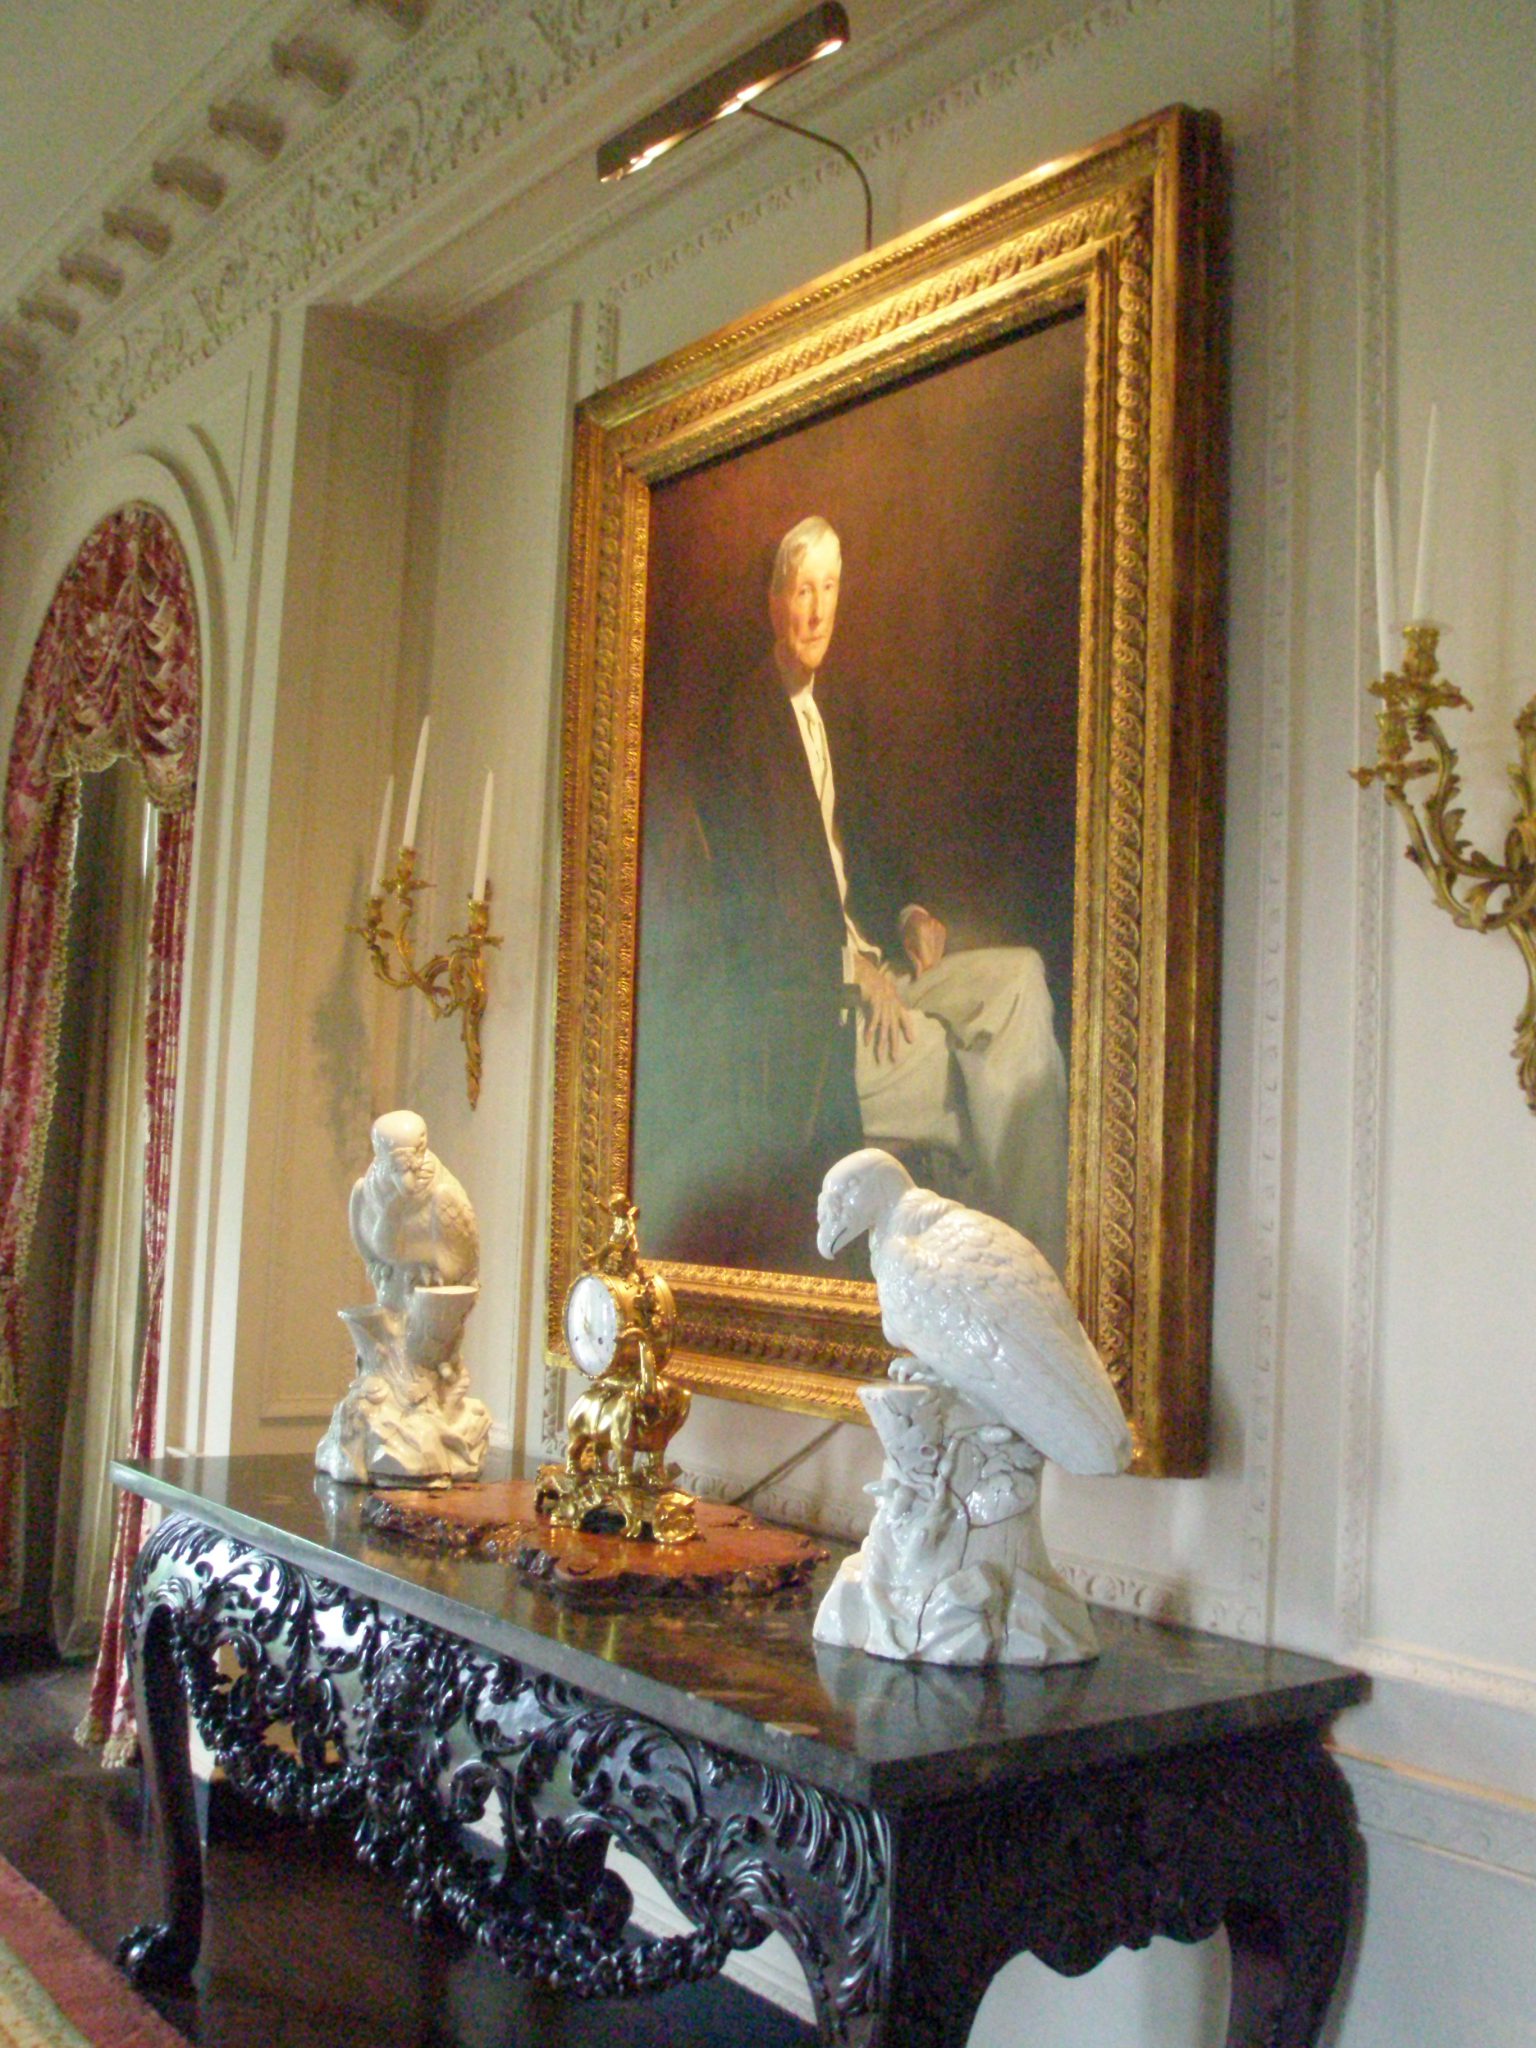 Dining Room, with John Singer Sargent's portrait of JDR, painted in 1917. Flanked by two massive Meissen birds (c.1734)